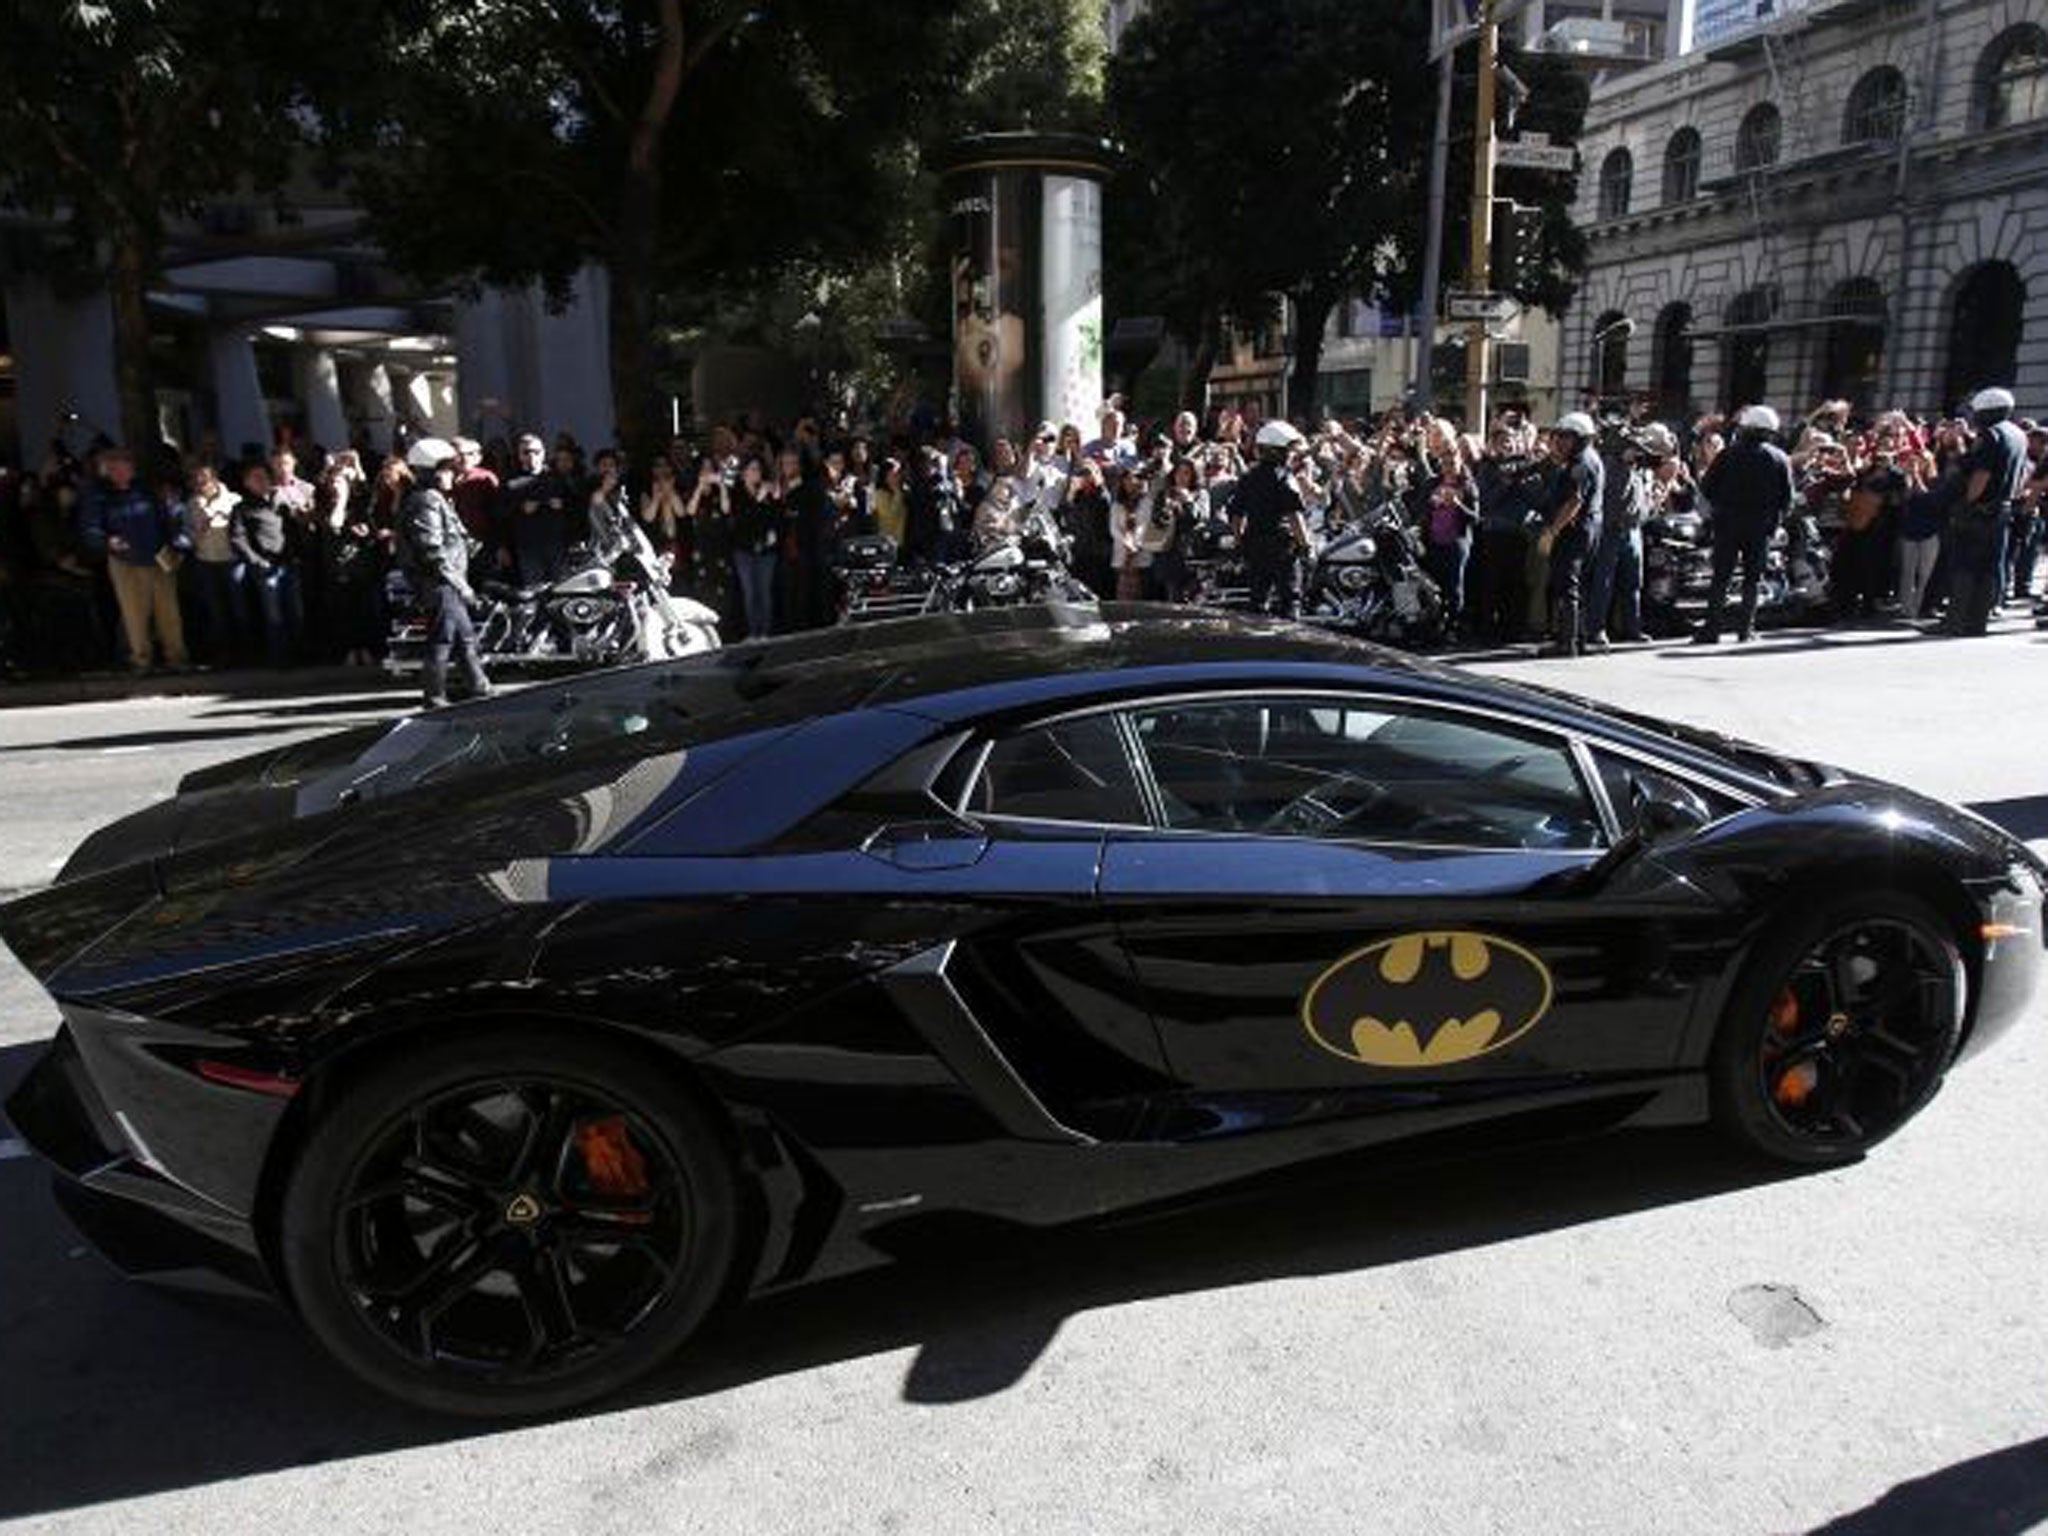 The Batmobile Batkid Miles arrived in